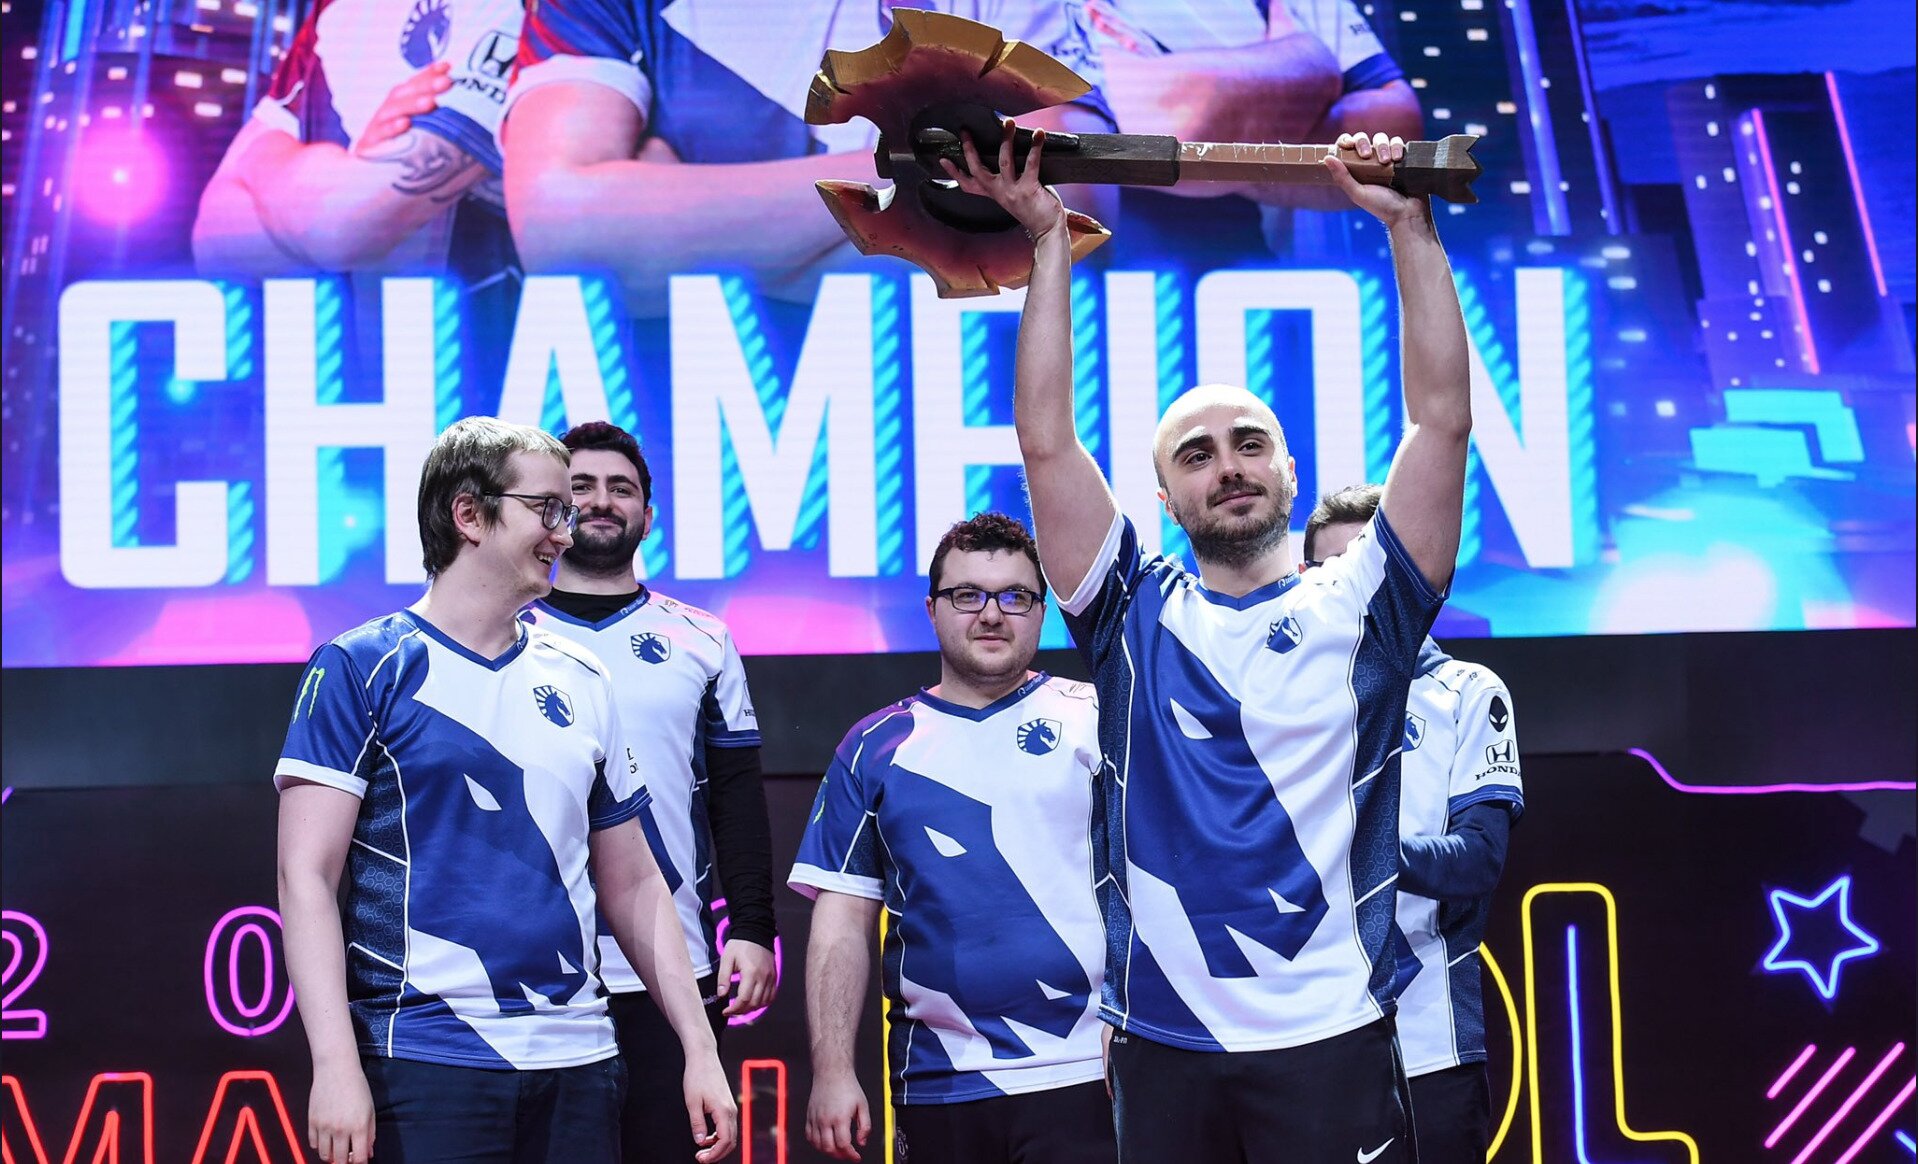 Team Liquid won the trophy at MDL Macau 2019 this morning, beating Evil Geniuses in a strong 3-1 series.